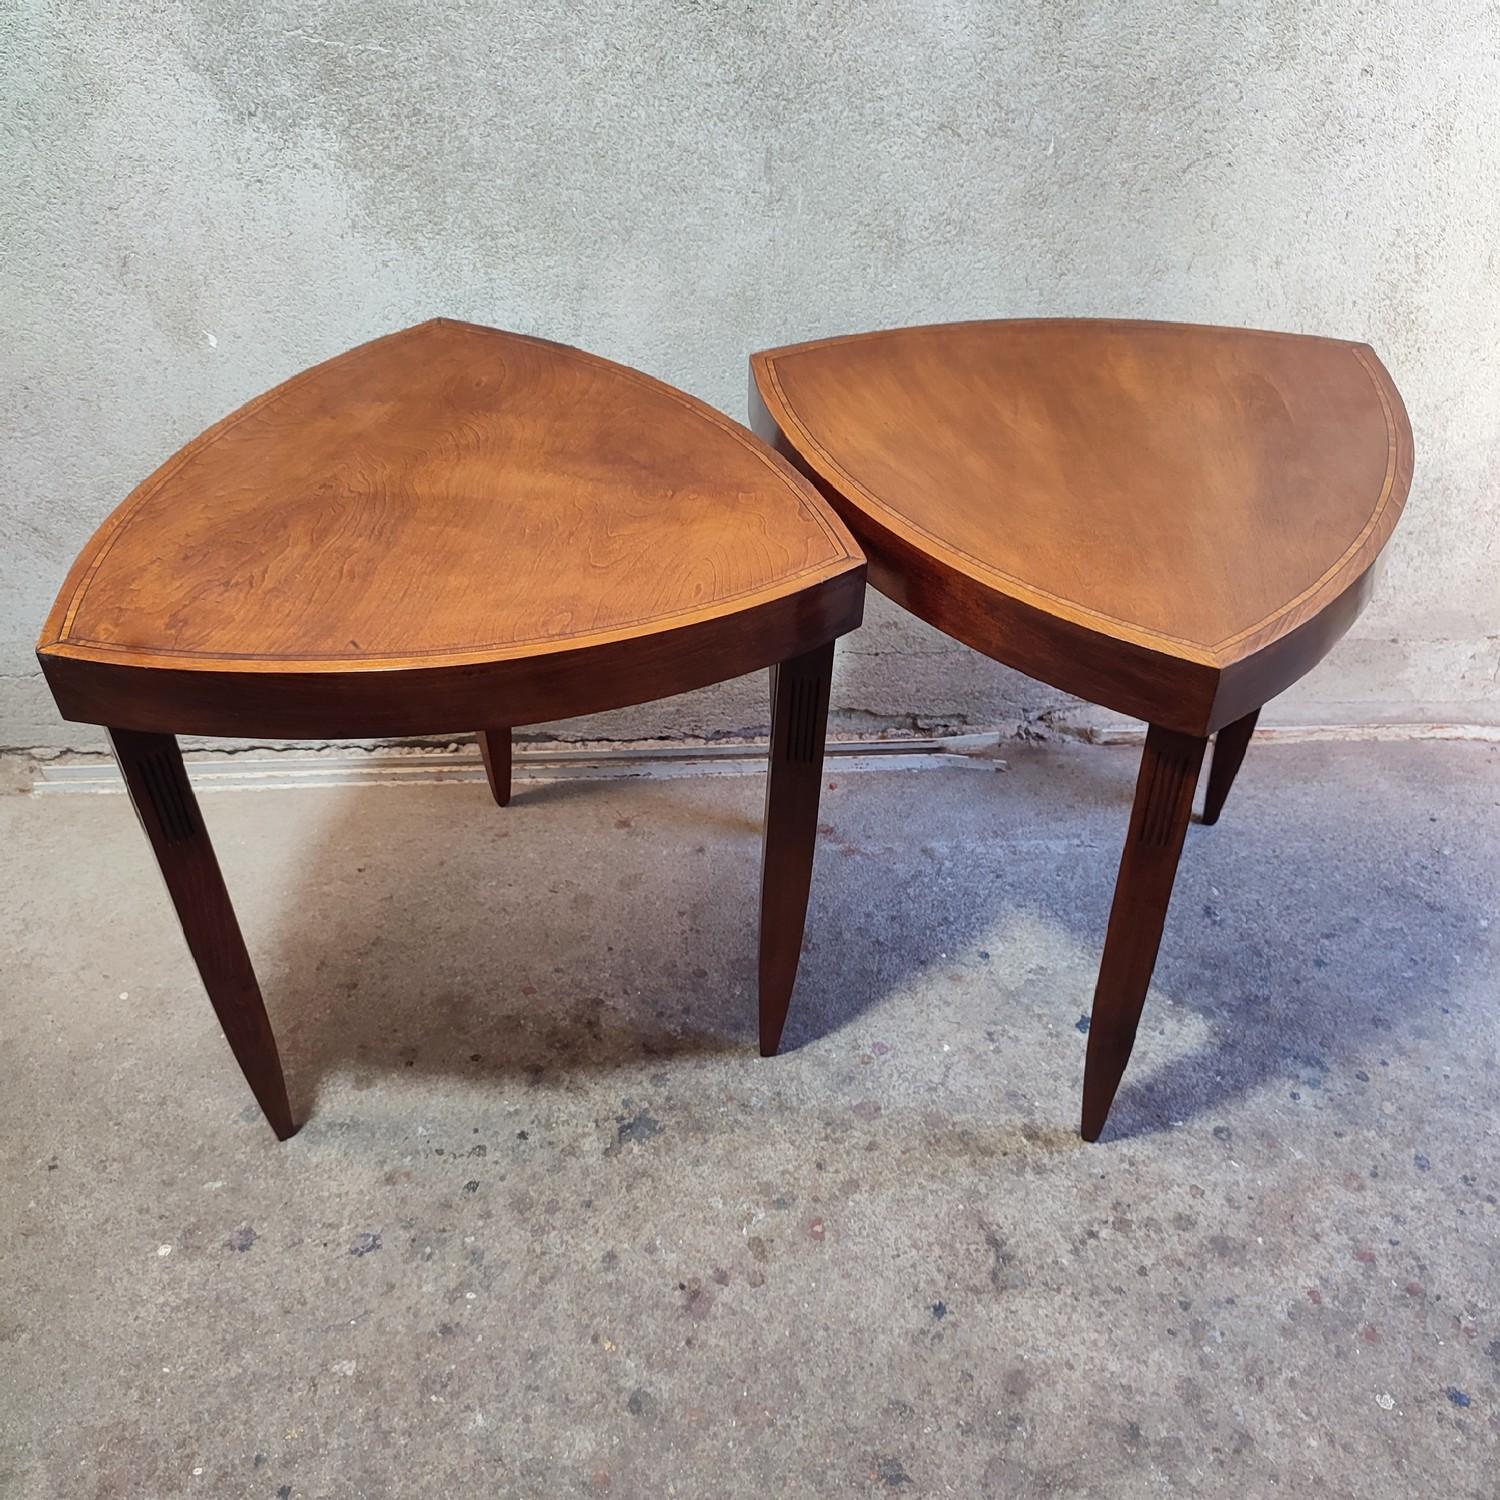 Pair of triangular end tables, manufactured by Stella in the 1960's. Their rounded triangular shape is quite unique, and their tall legs make them quite stylish. They're in good condition with a nice color.
Do not hesitate to contact me for a